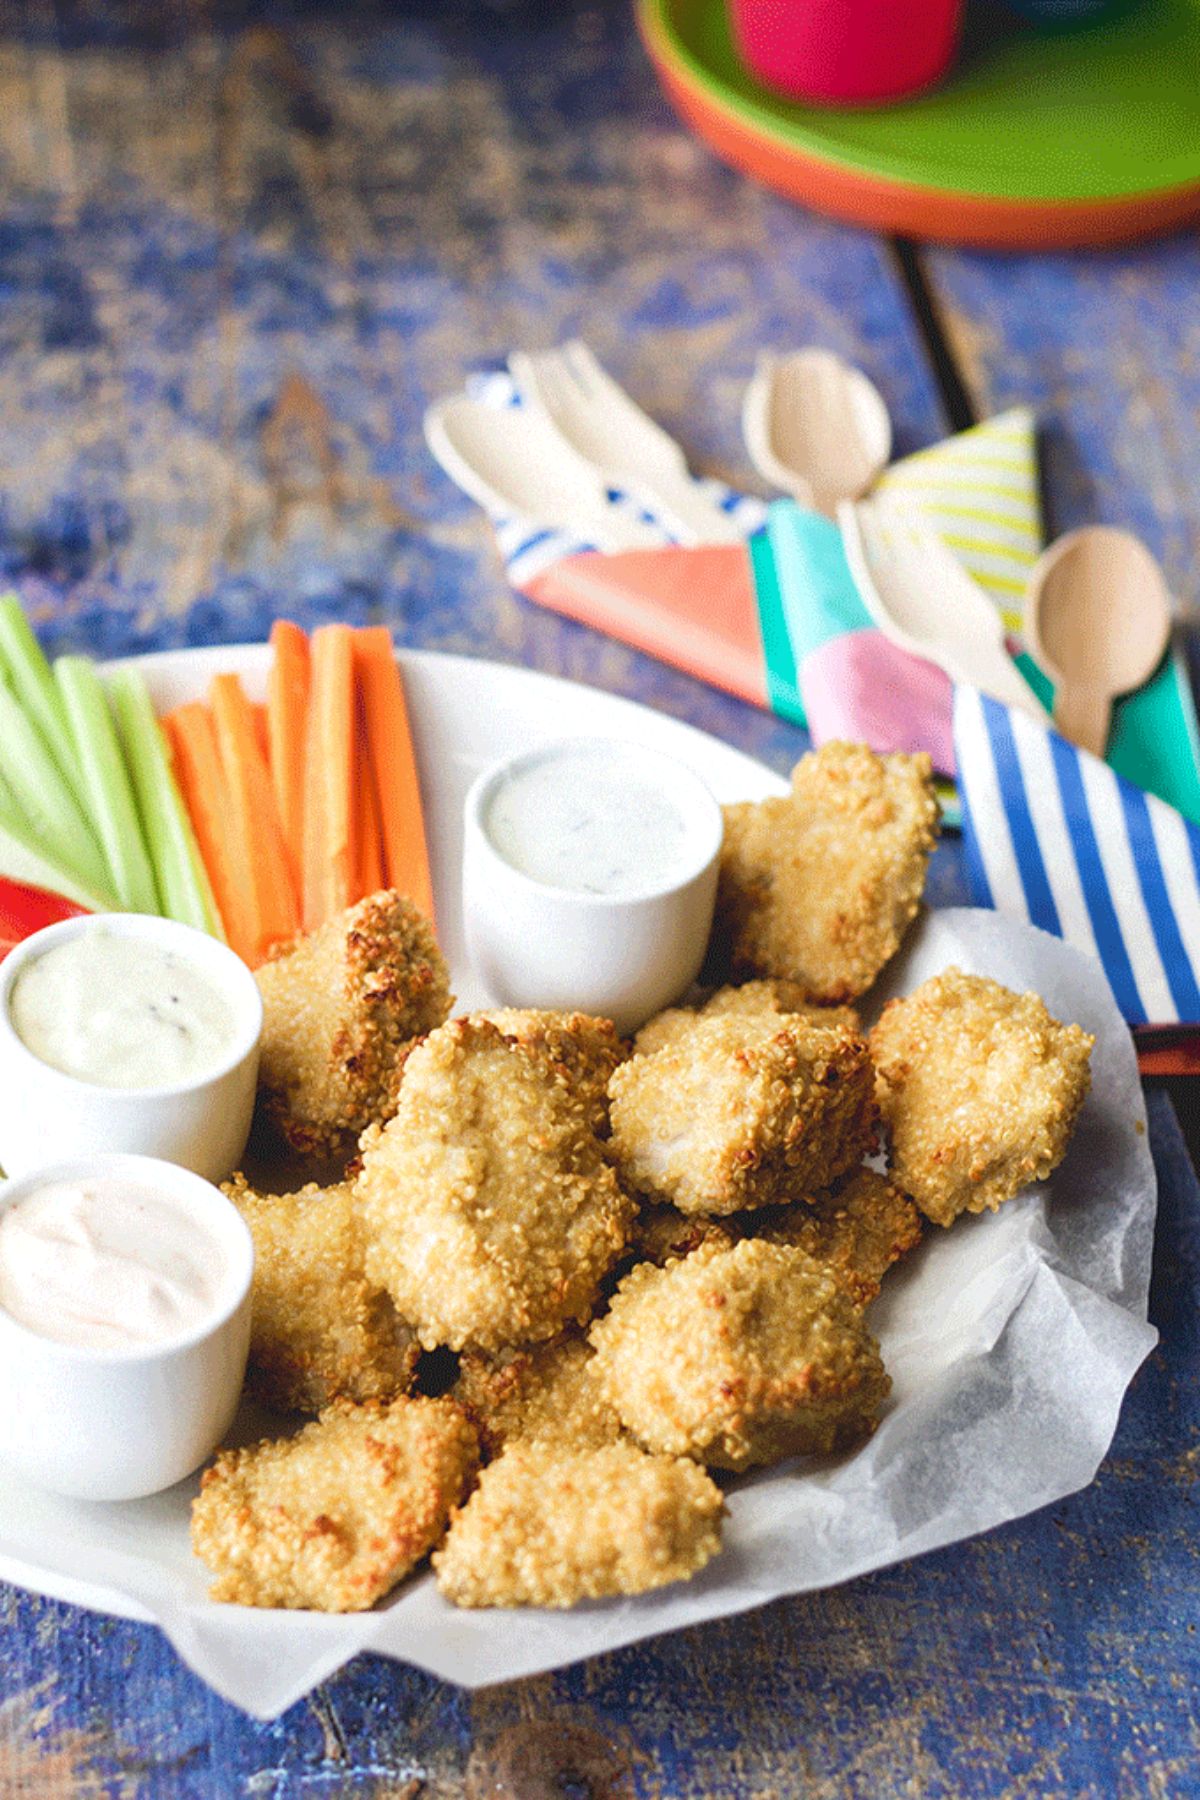 Crispy quinoa-crusted chicken nuggets with bowls of dip and veggies on a white tray.